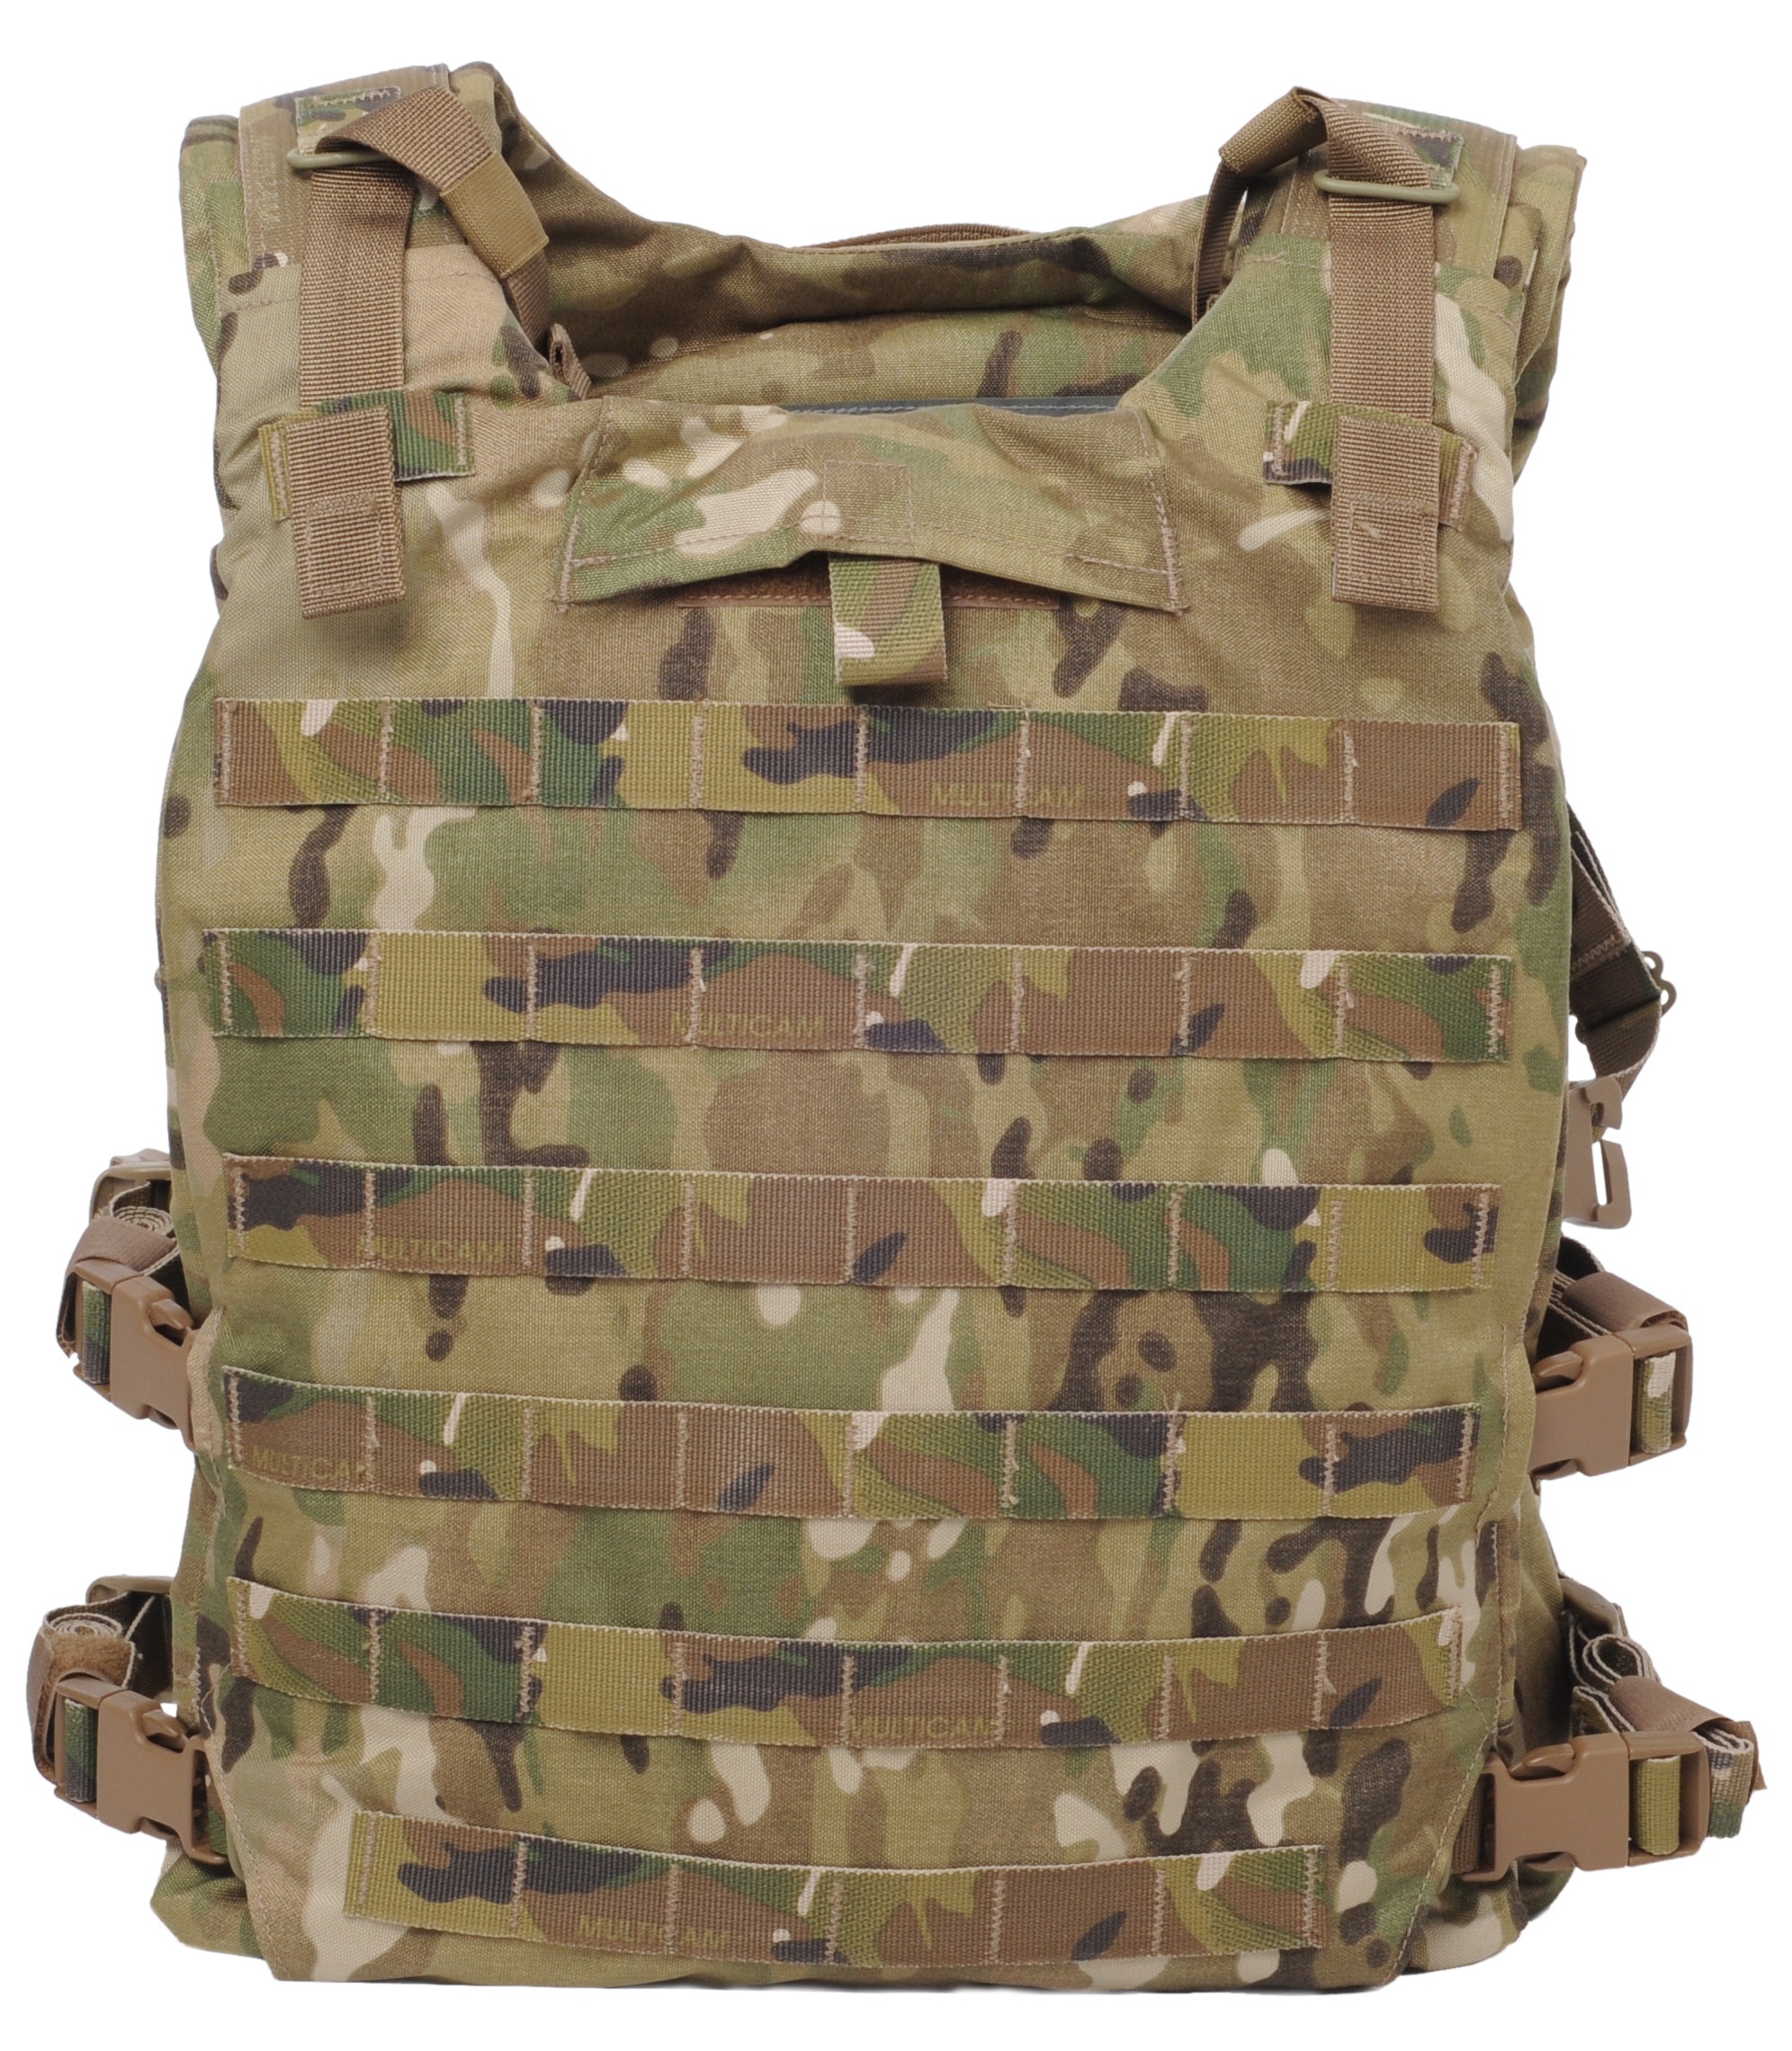 Soldier_Plate_Carrier_System_%28SPCS%29.jpg